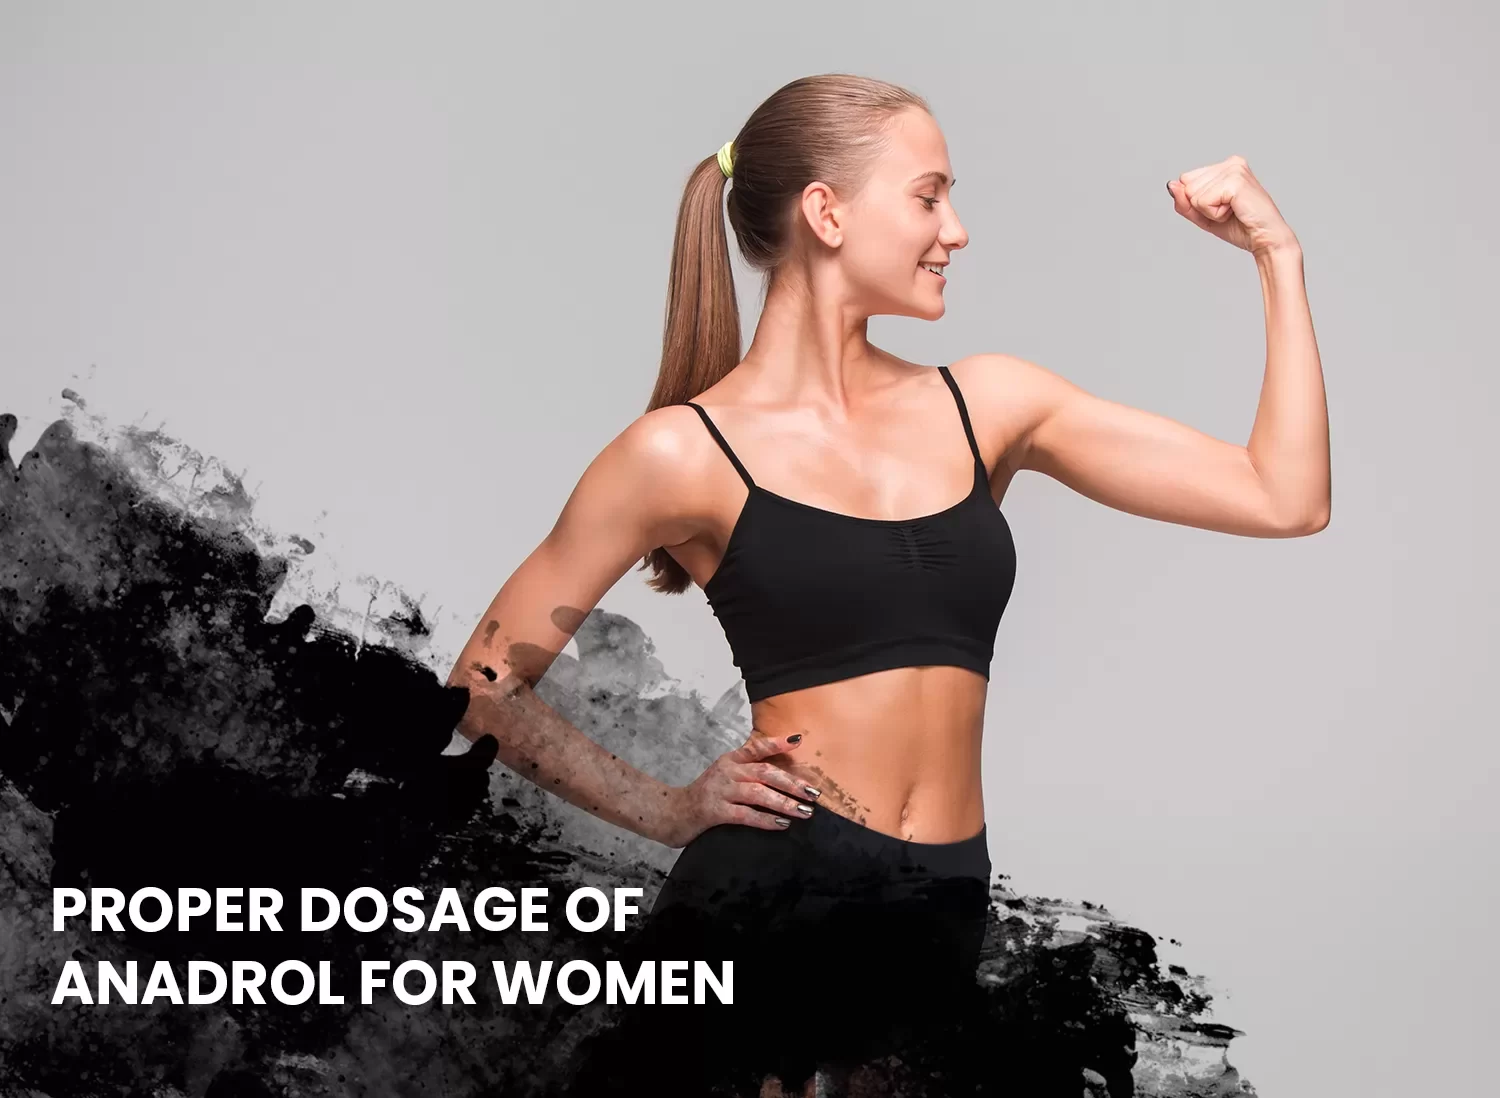 Anadrol for women dosage